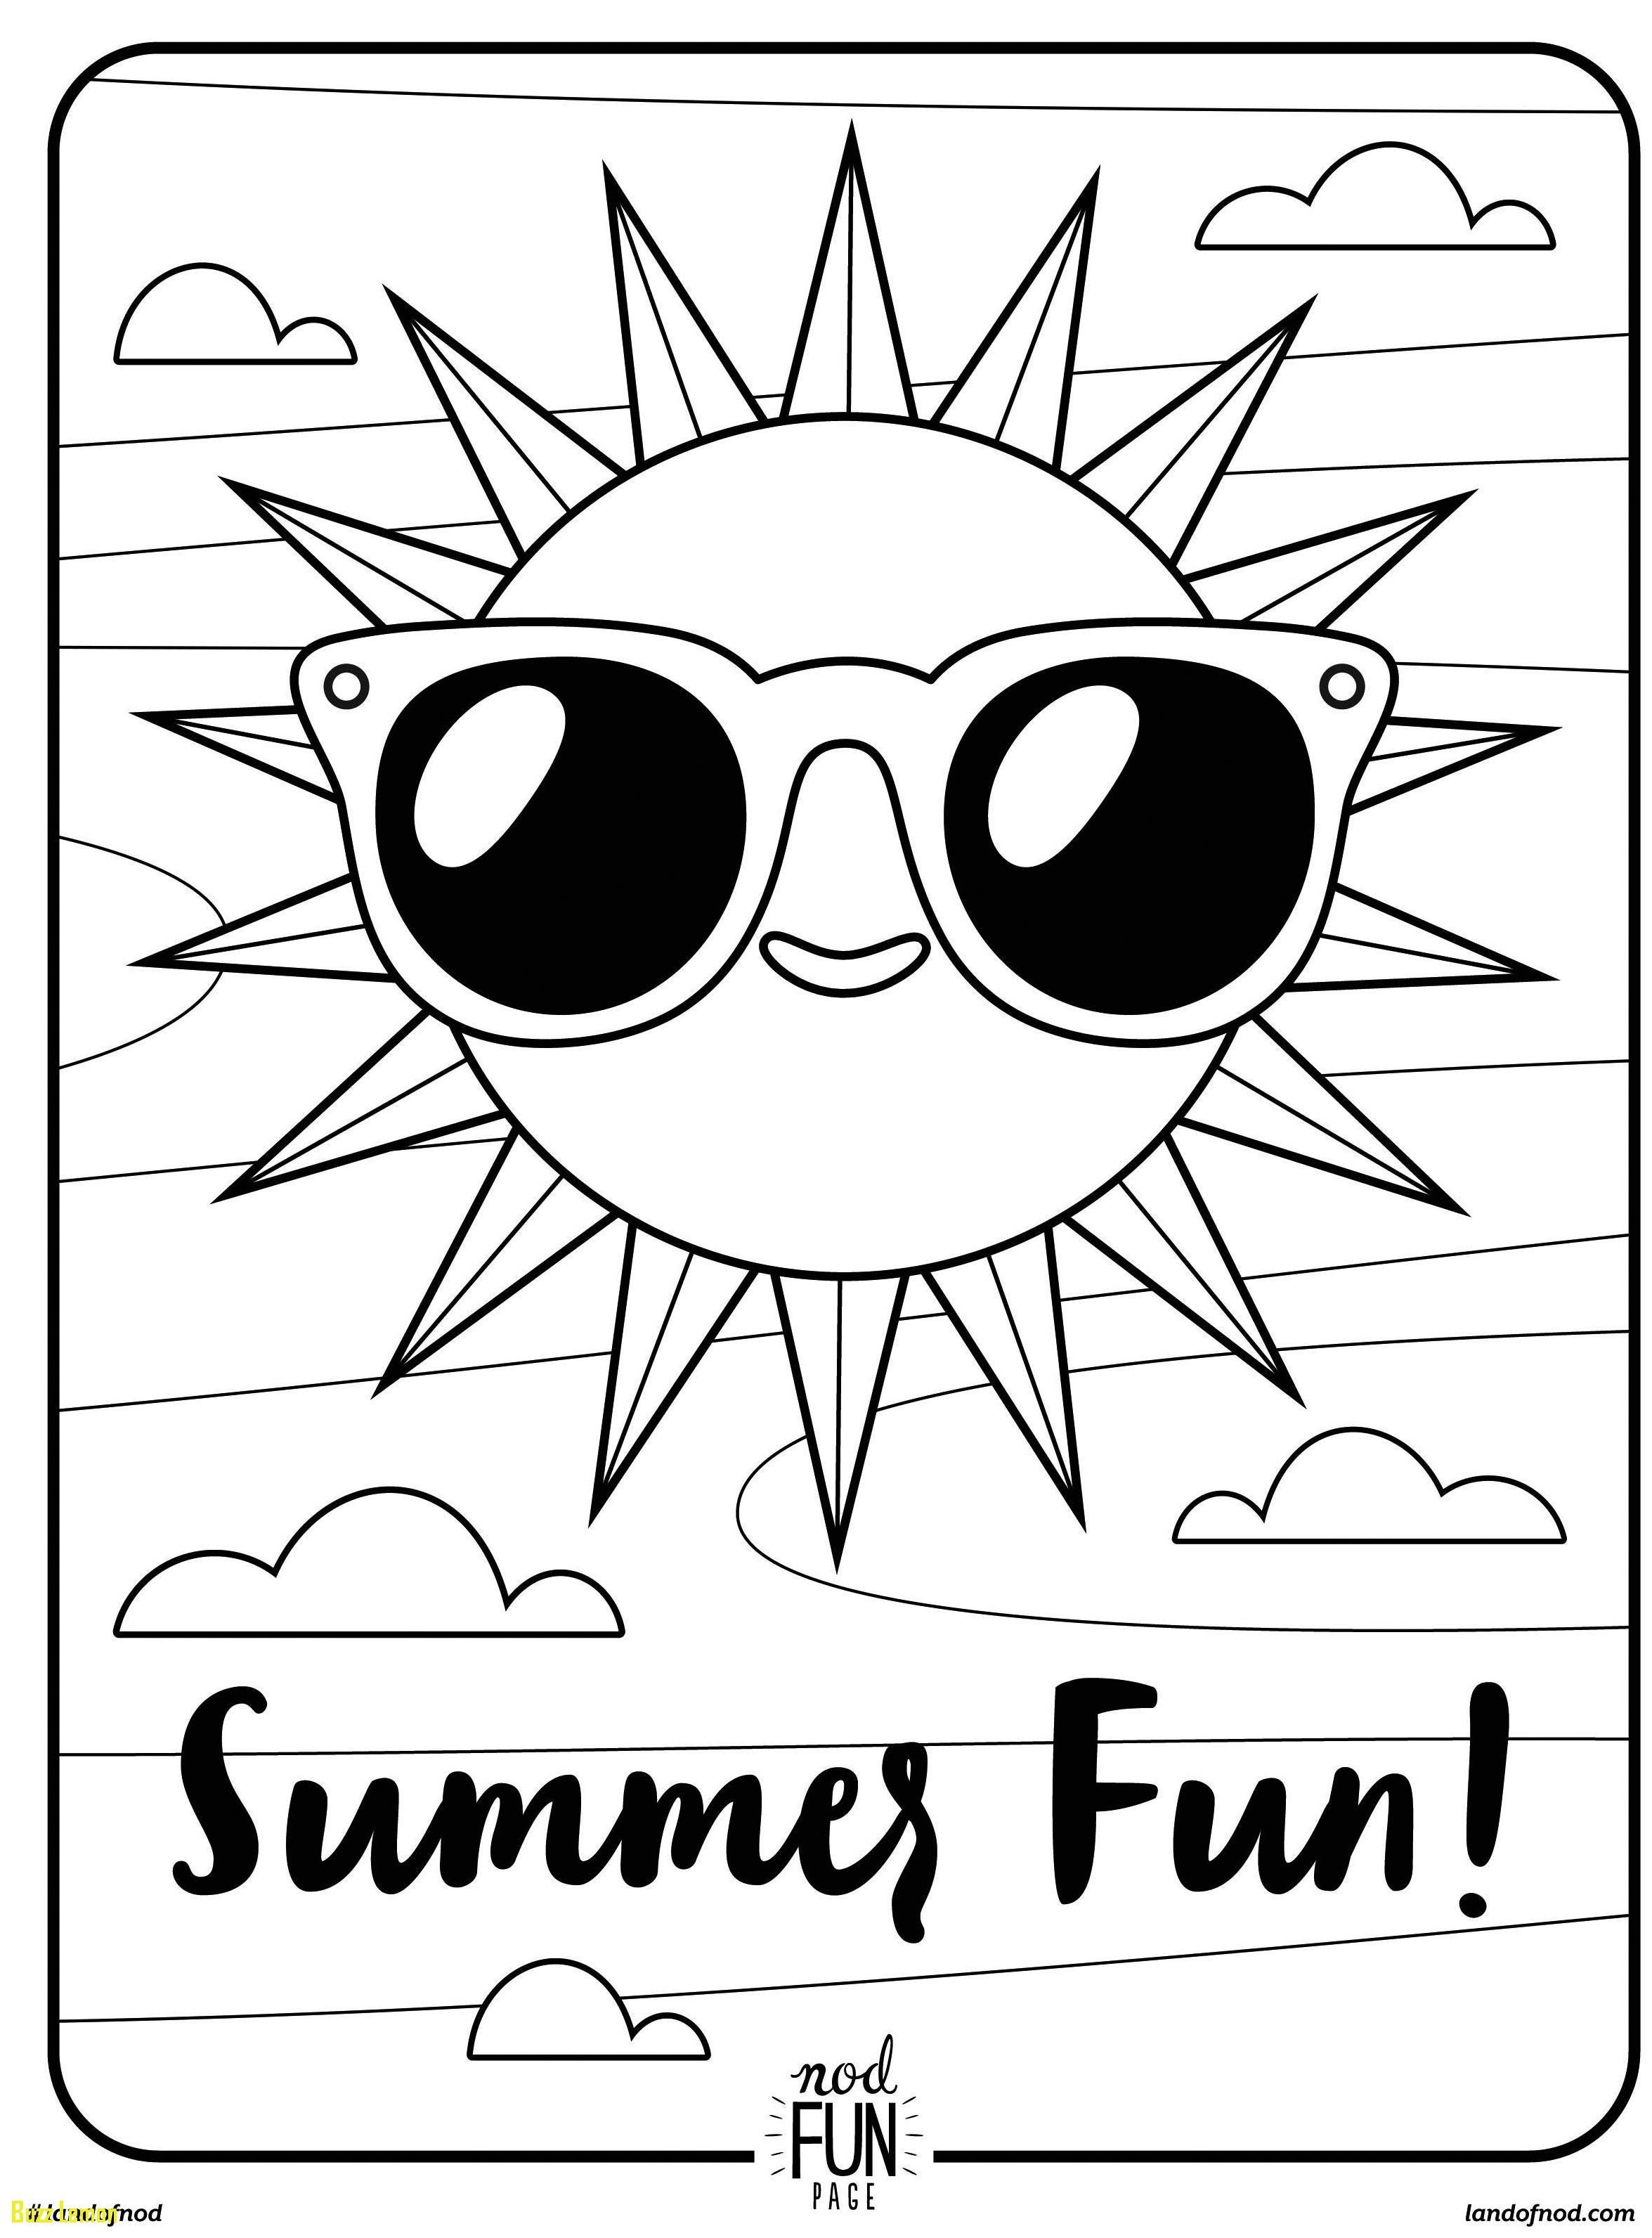 Coloring Pages : Printable Summer Coloring Pages Beach Free For - Free Printable Summer Coloring Pages